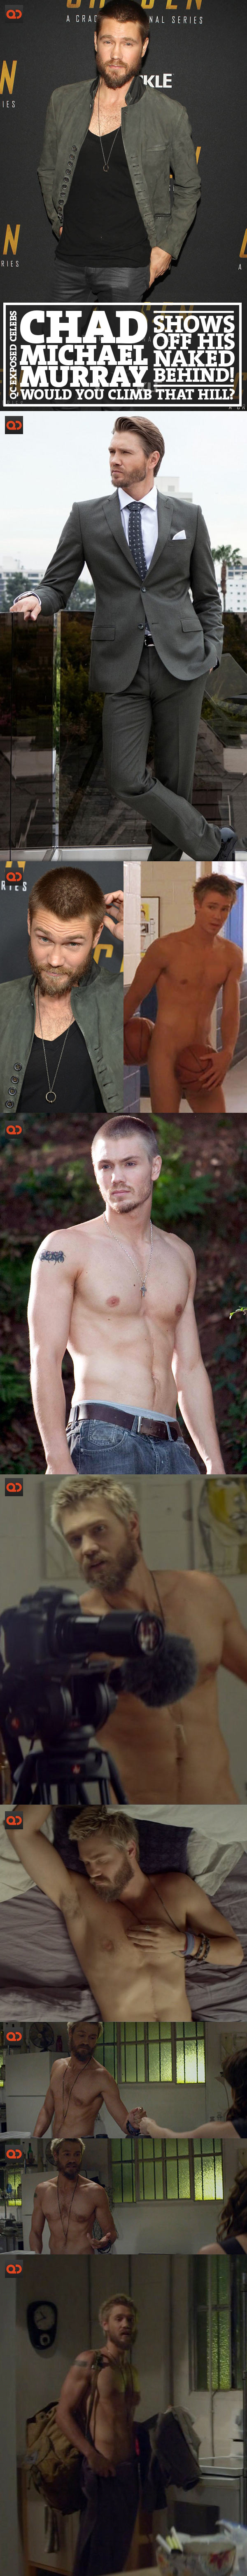 Chad Michael Murray Shows Off His Naked Behind! Would You Climb That Hill?